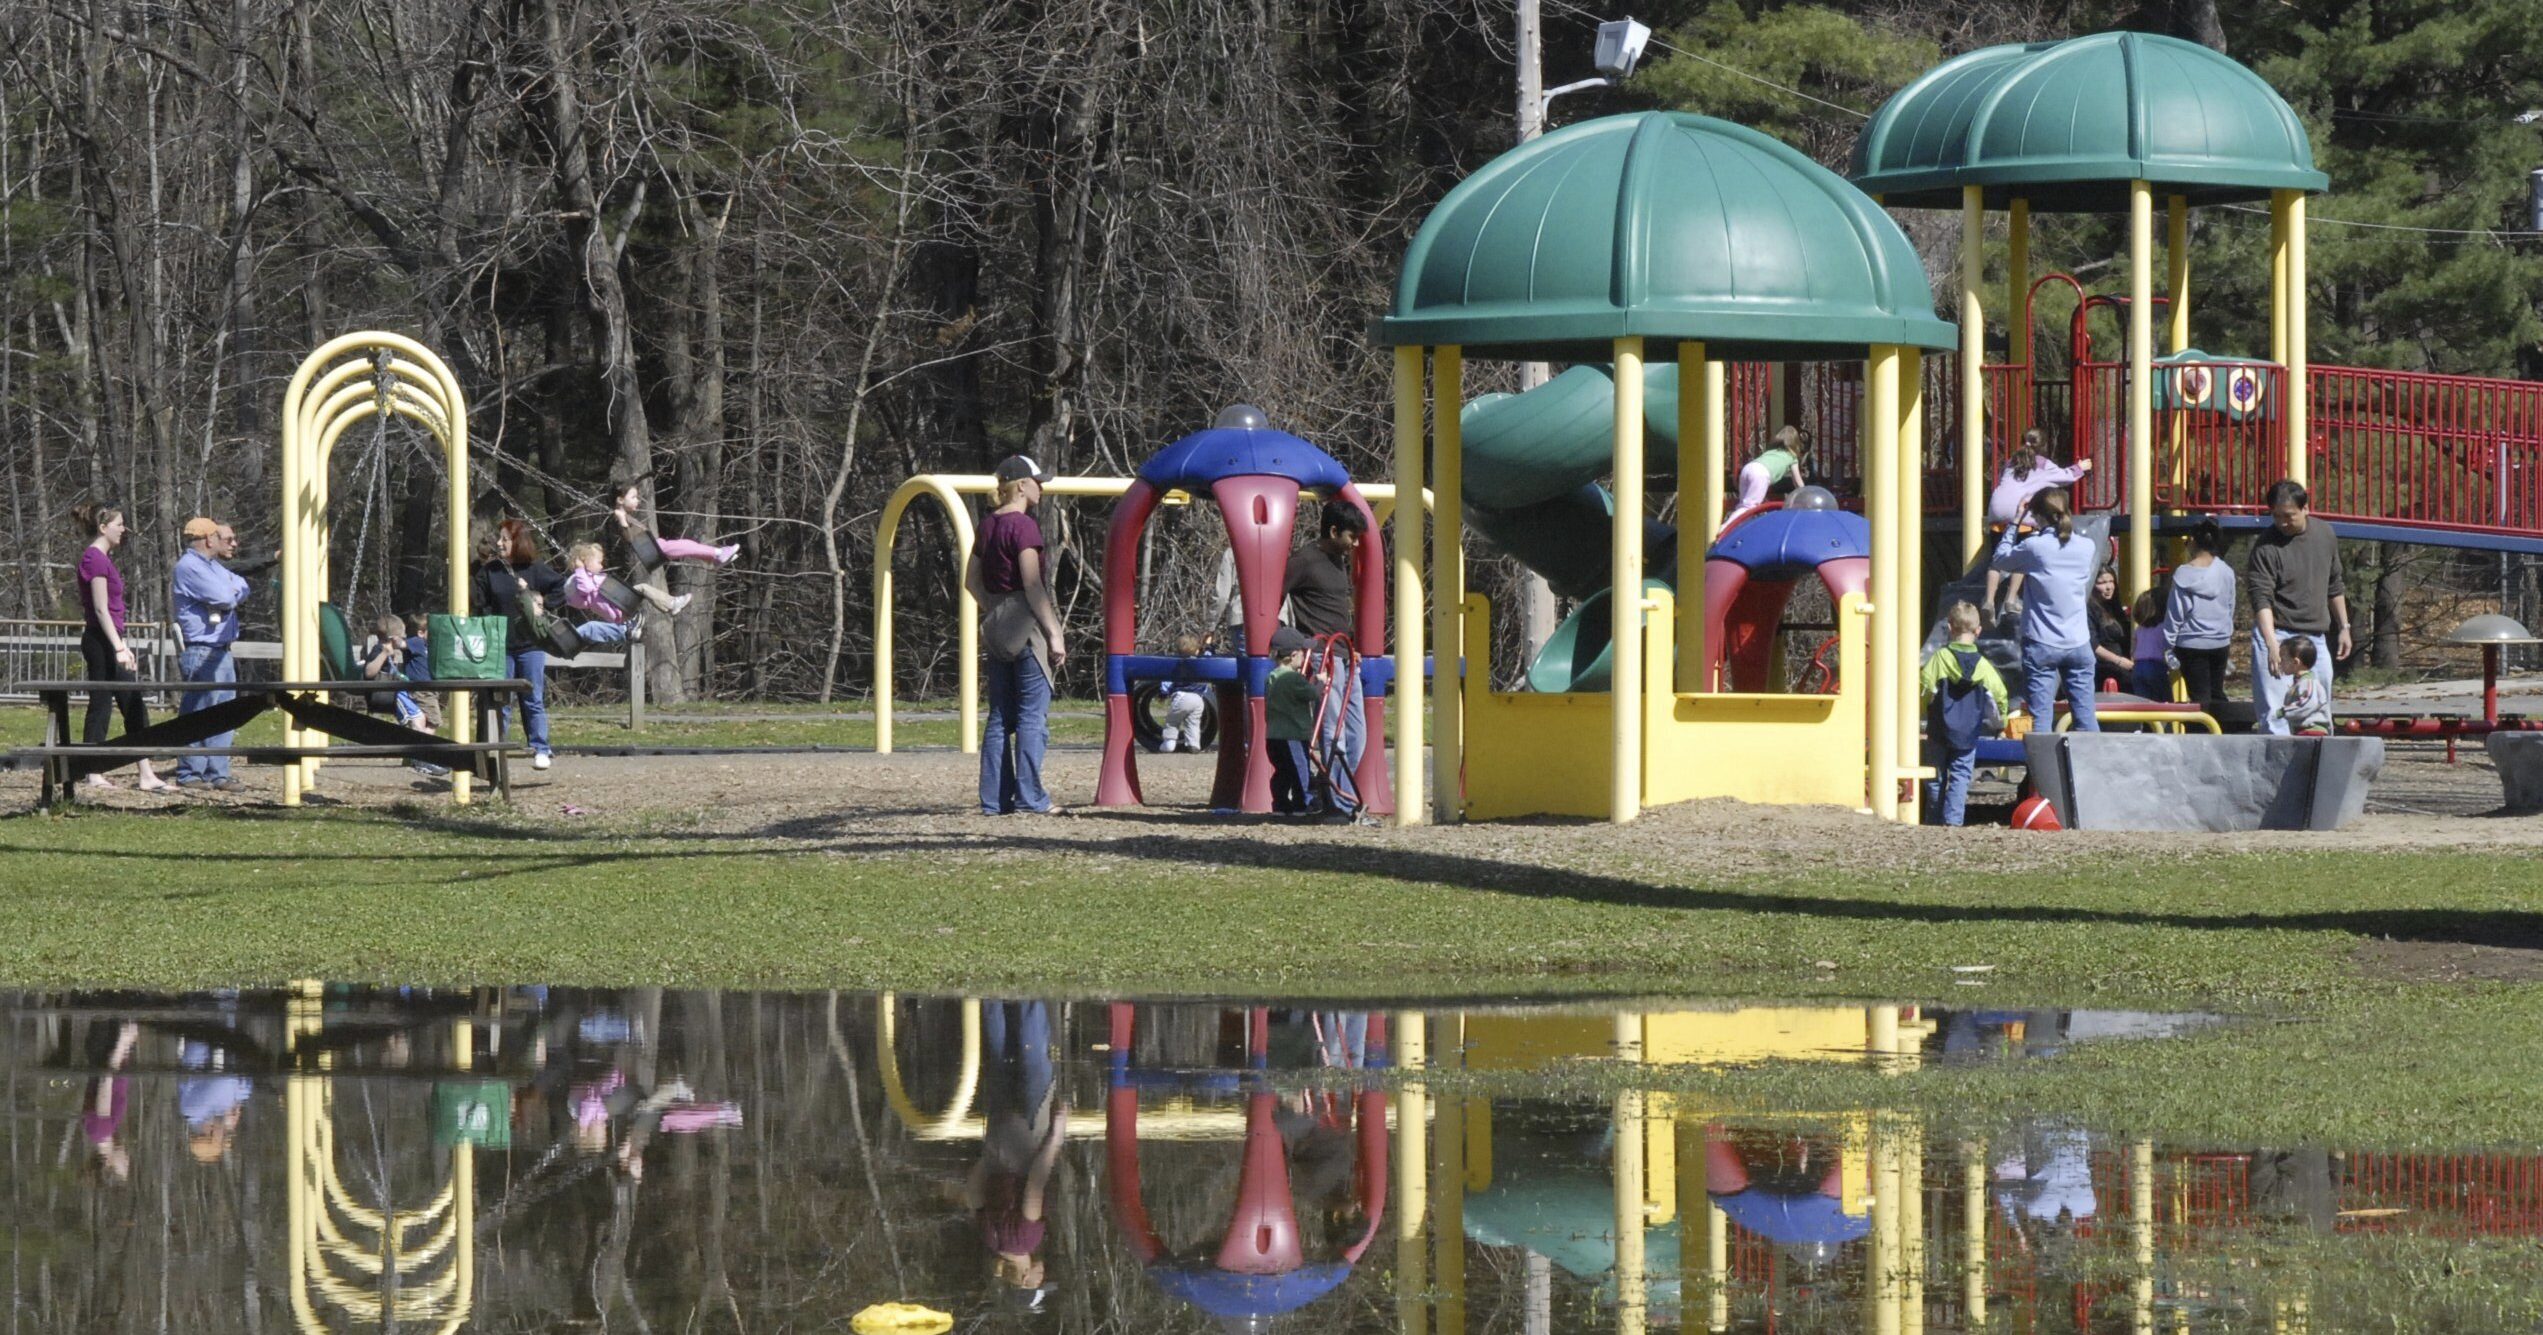 The playground at Bliss Park in Longmeadow, Massachusetts, is reflected in standing water in an April 2, 2010, file photo.